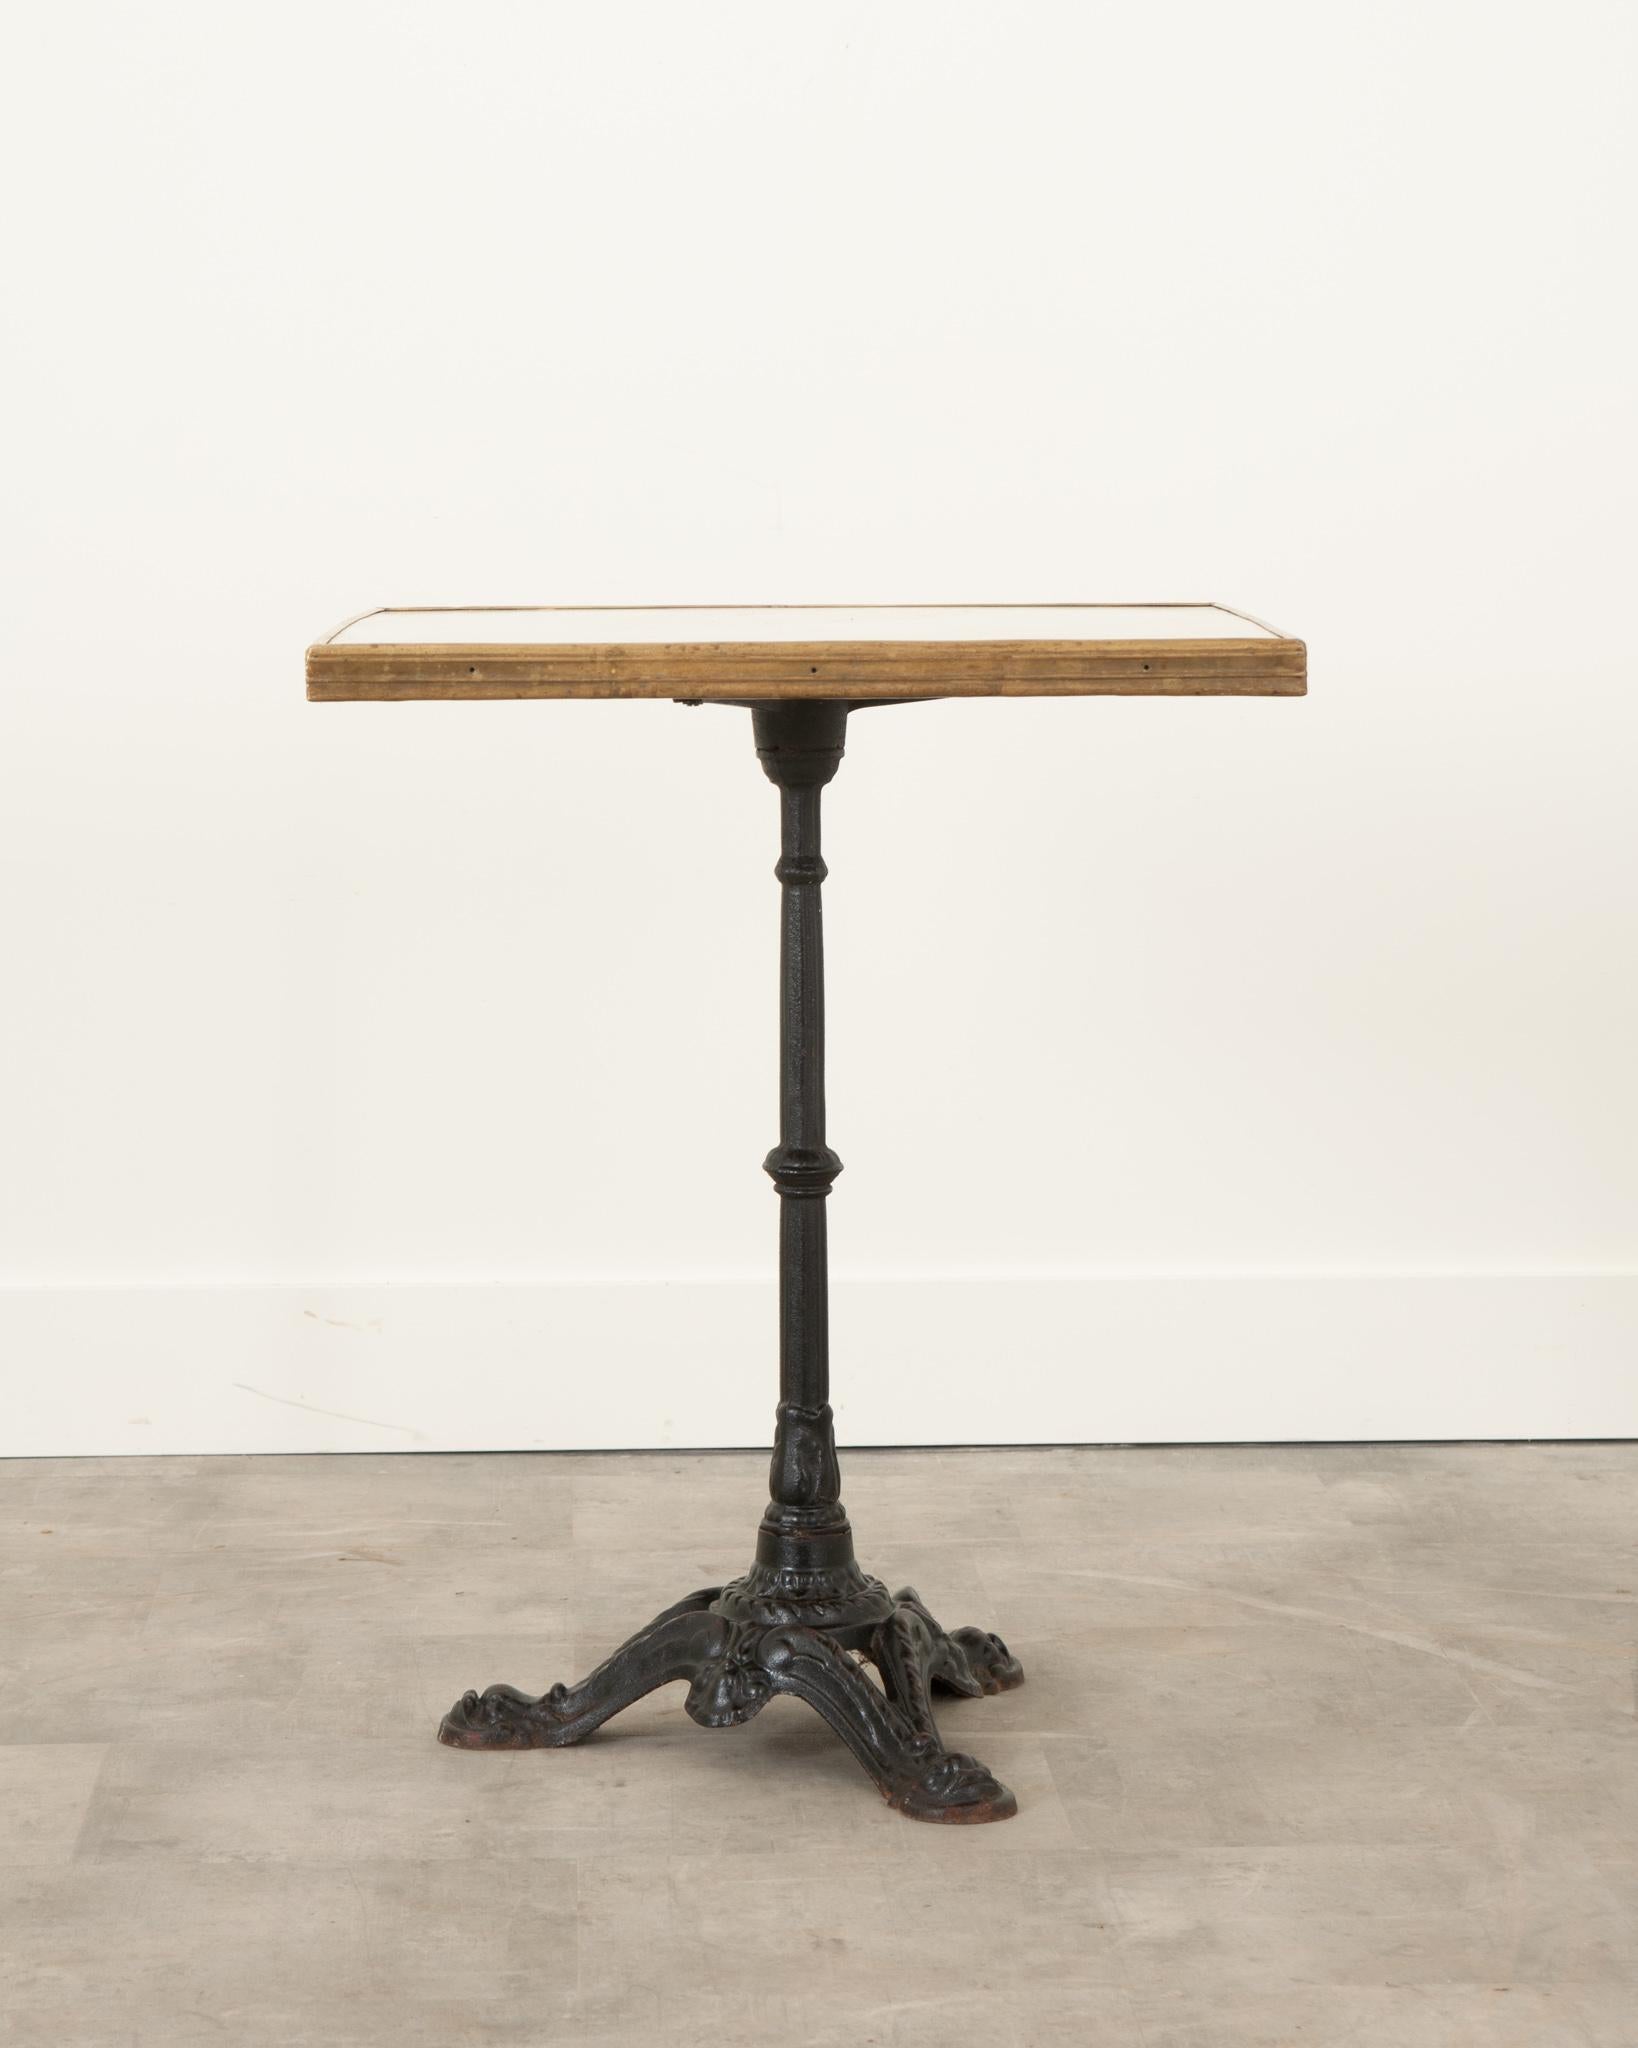 This sturdy bistro table is made from cast iron with a beautiful square formica top. The top is bordered by a brilliantly- patinated wide brass band and affixed to a cast iron tripodal base. There are some visible scratches on the top, adding to the